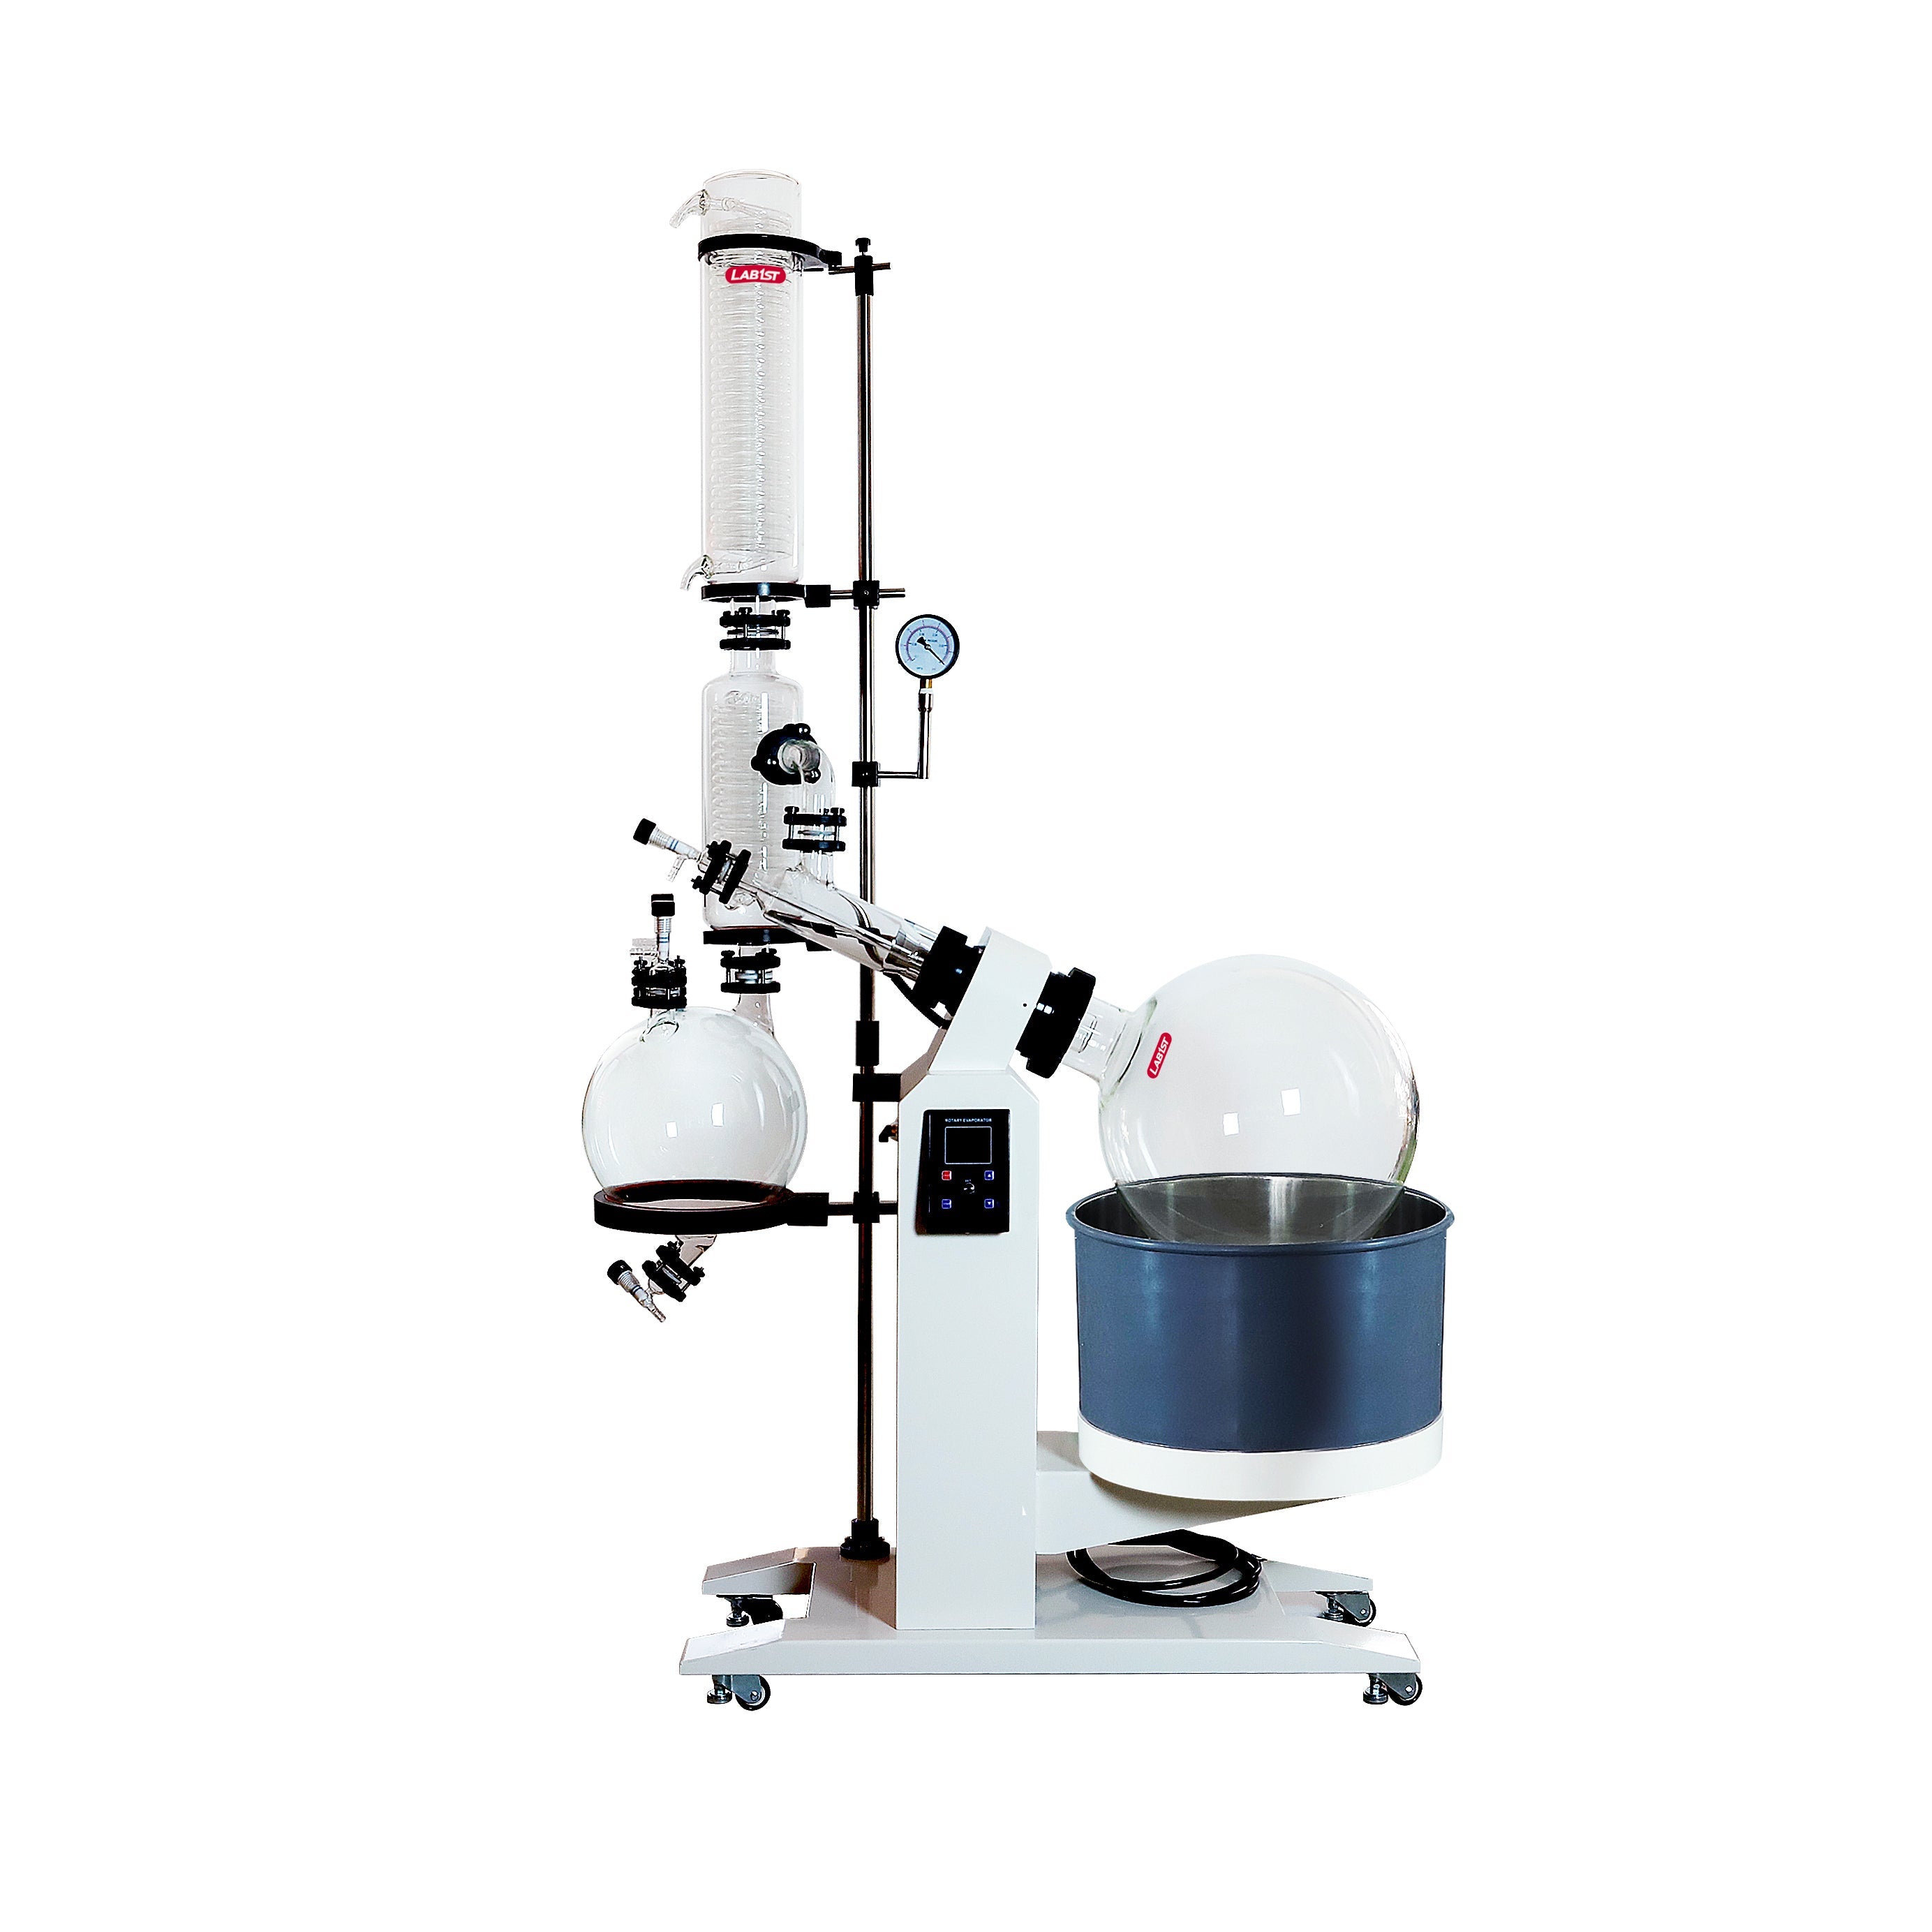 20L Rotary Evaporator with Motor Lift